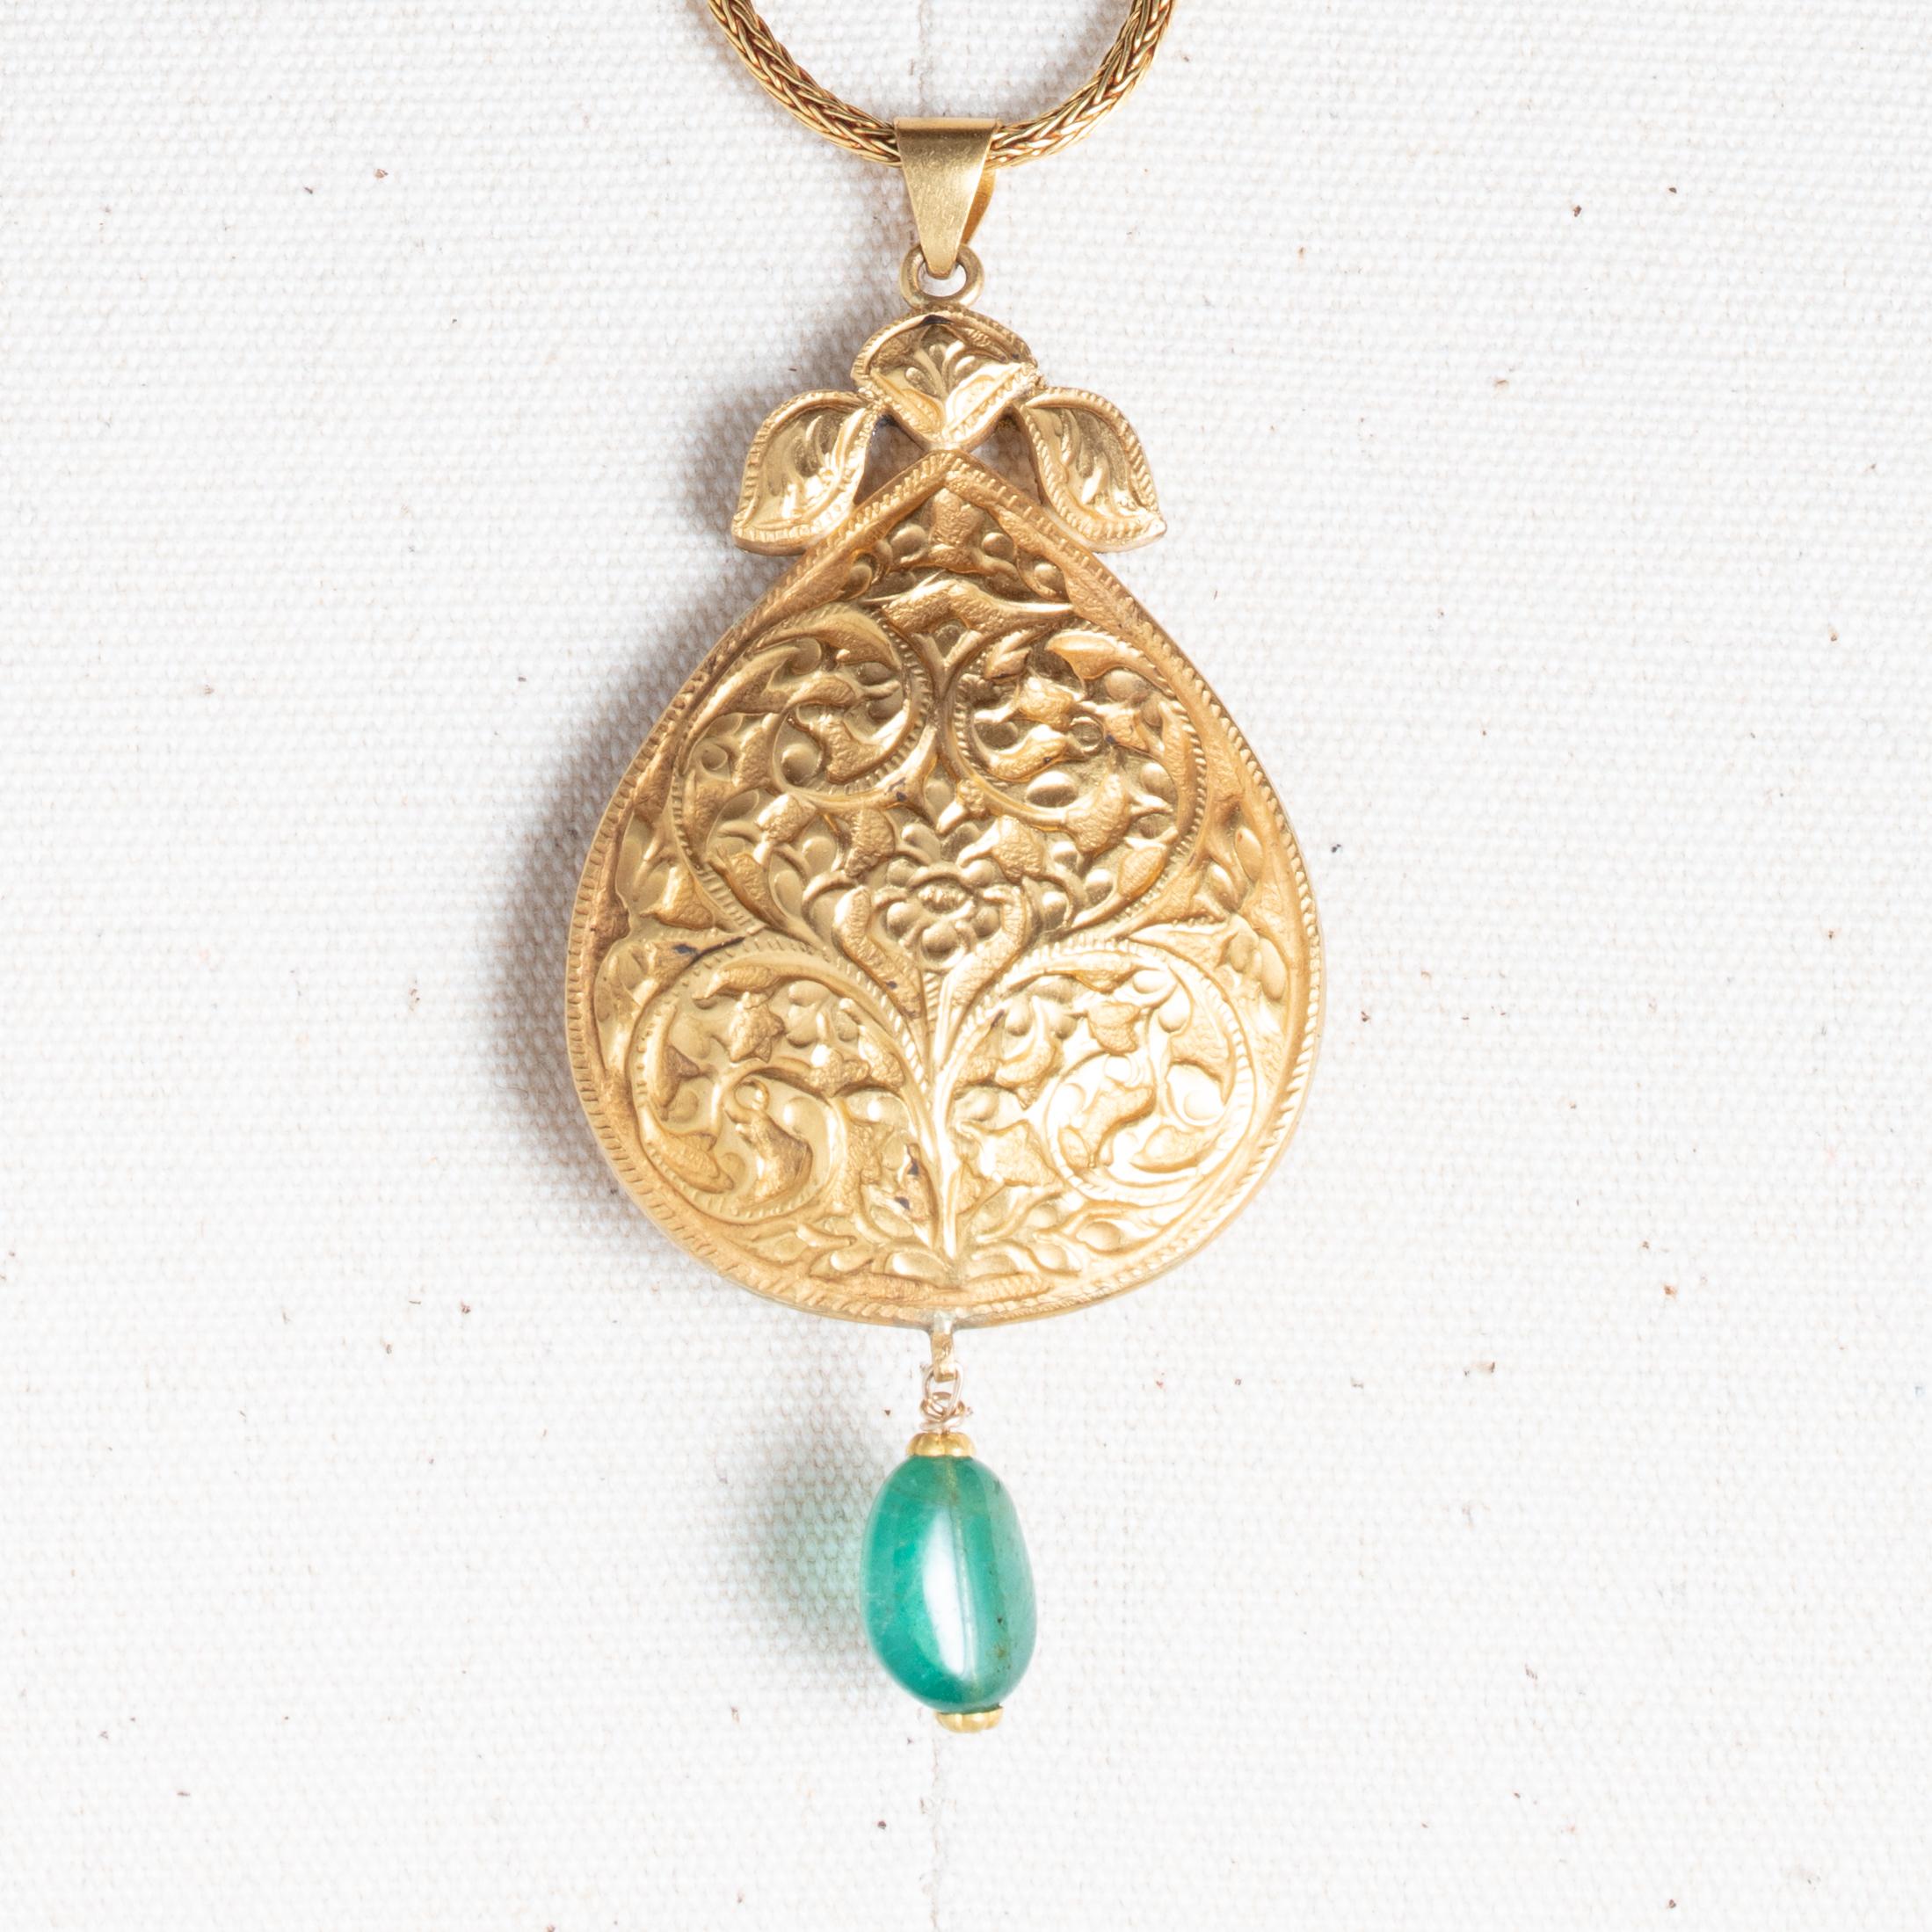 A lovely 22K gold Nava Ratna pendant comprised of precious and semi-precious stones.  Fine tooling on the border and reversible to a repousse` floral and vine motif on the other side.  The length of the pendant is 2.5 inches and a tumbled emerald